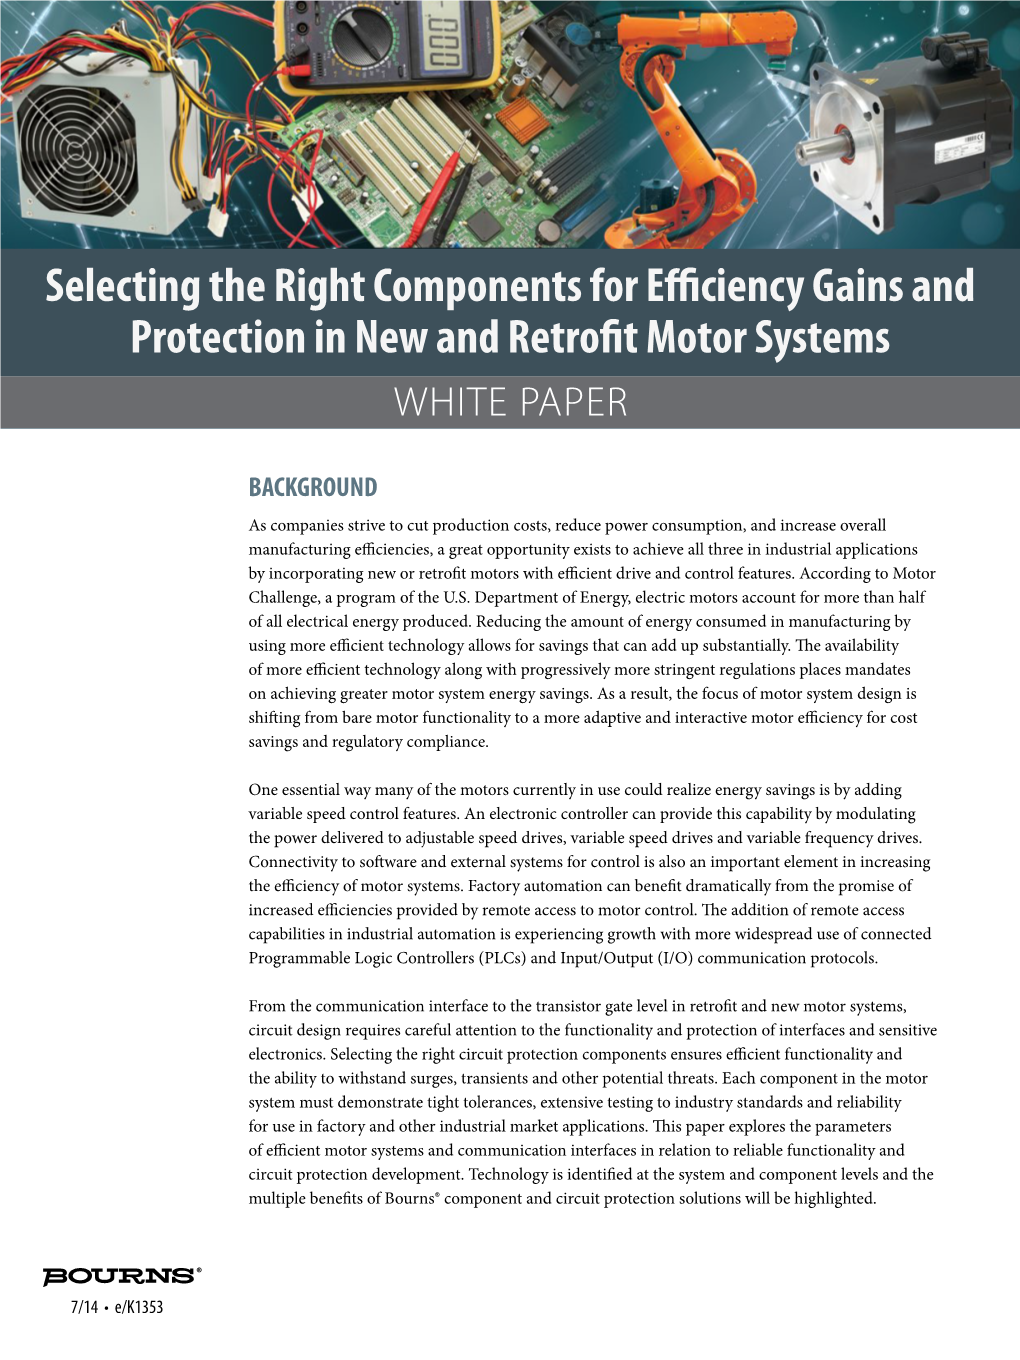 Selecting the Right Components for Efficiency Gains and Protection in New and Retrofit Motor Systems WHITE PAPER